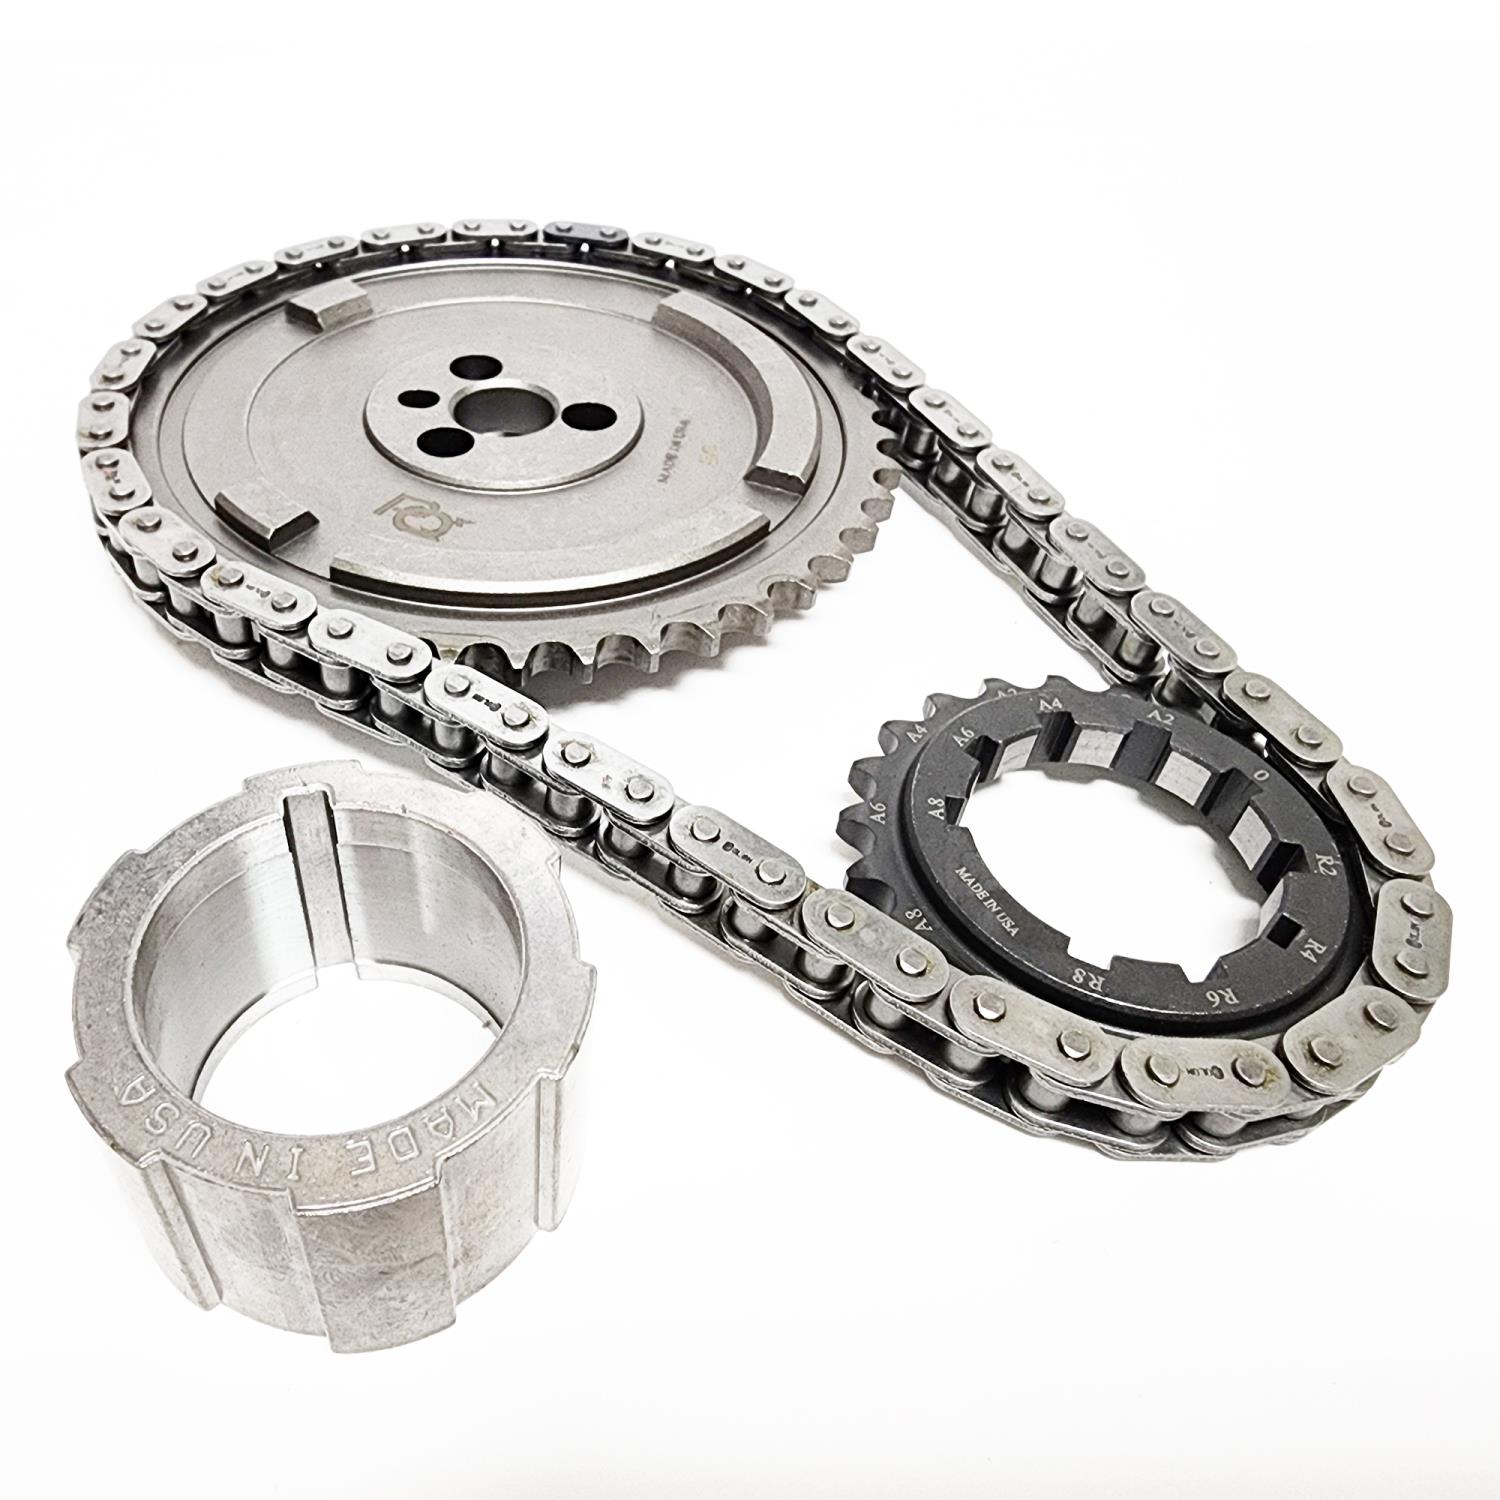 Single-Roller Timing Chain and Gear Set for 2006 GM LS3, 2007 GM L92